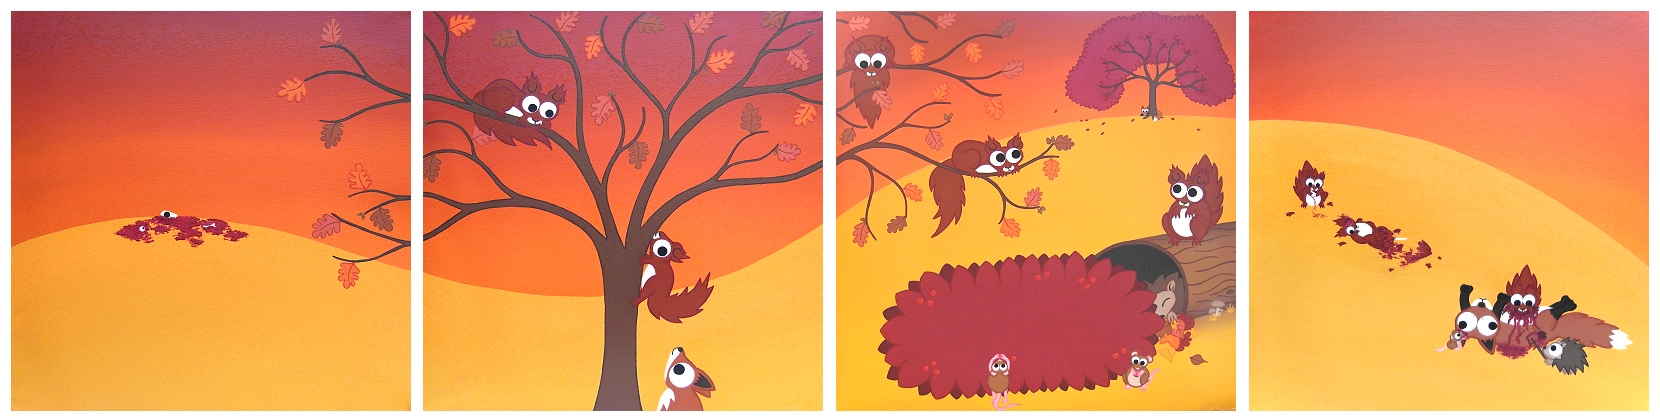 A cartoon landscape set in autumn painted over 4 panels. 2 panels are cute, and 2 panels turn darker with prey animals getting their gory revenge on the predators